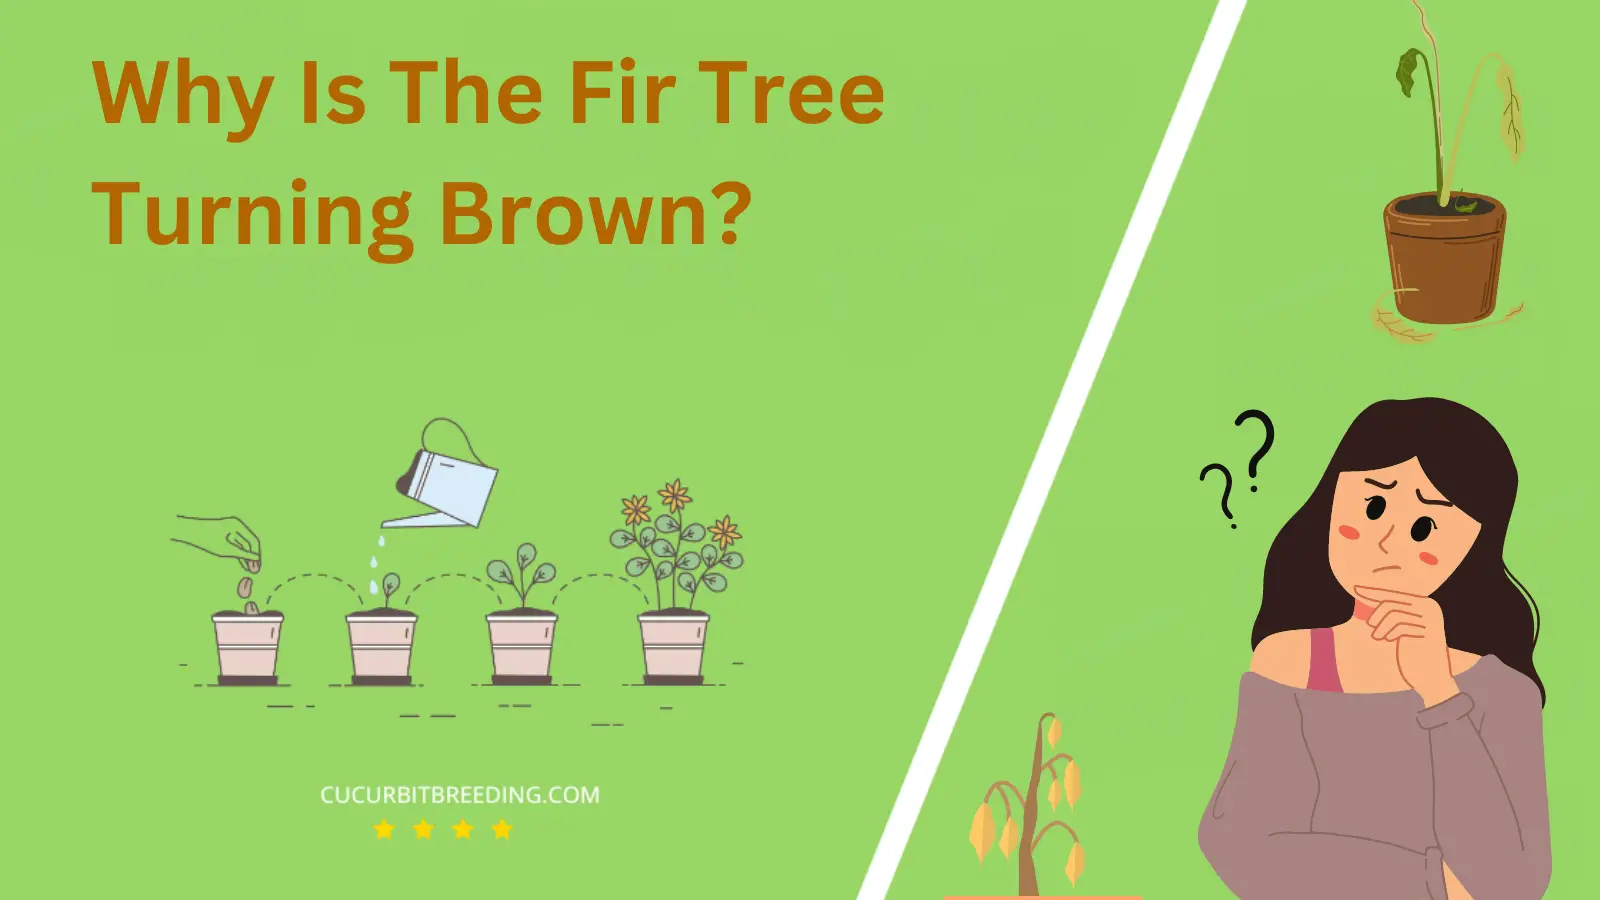 Why Is The Fir Tree Turning Brown